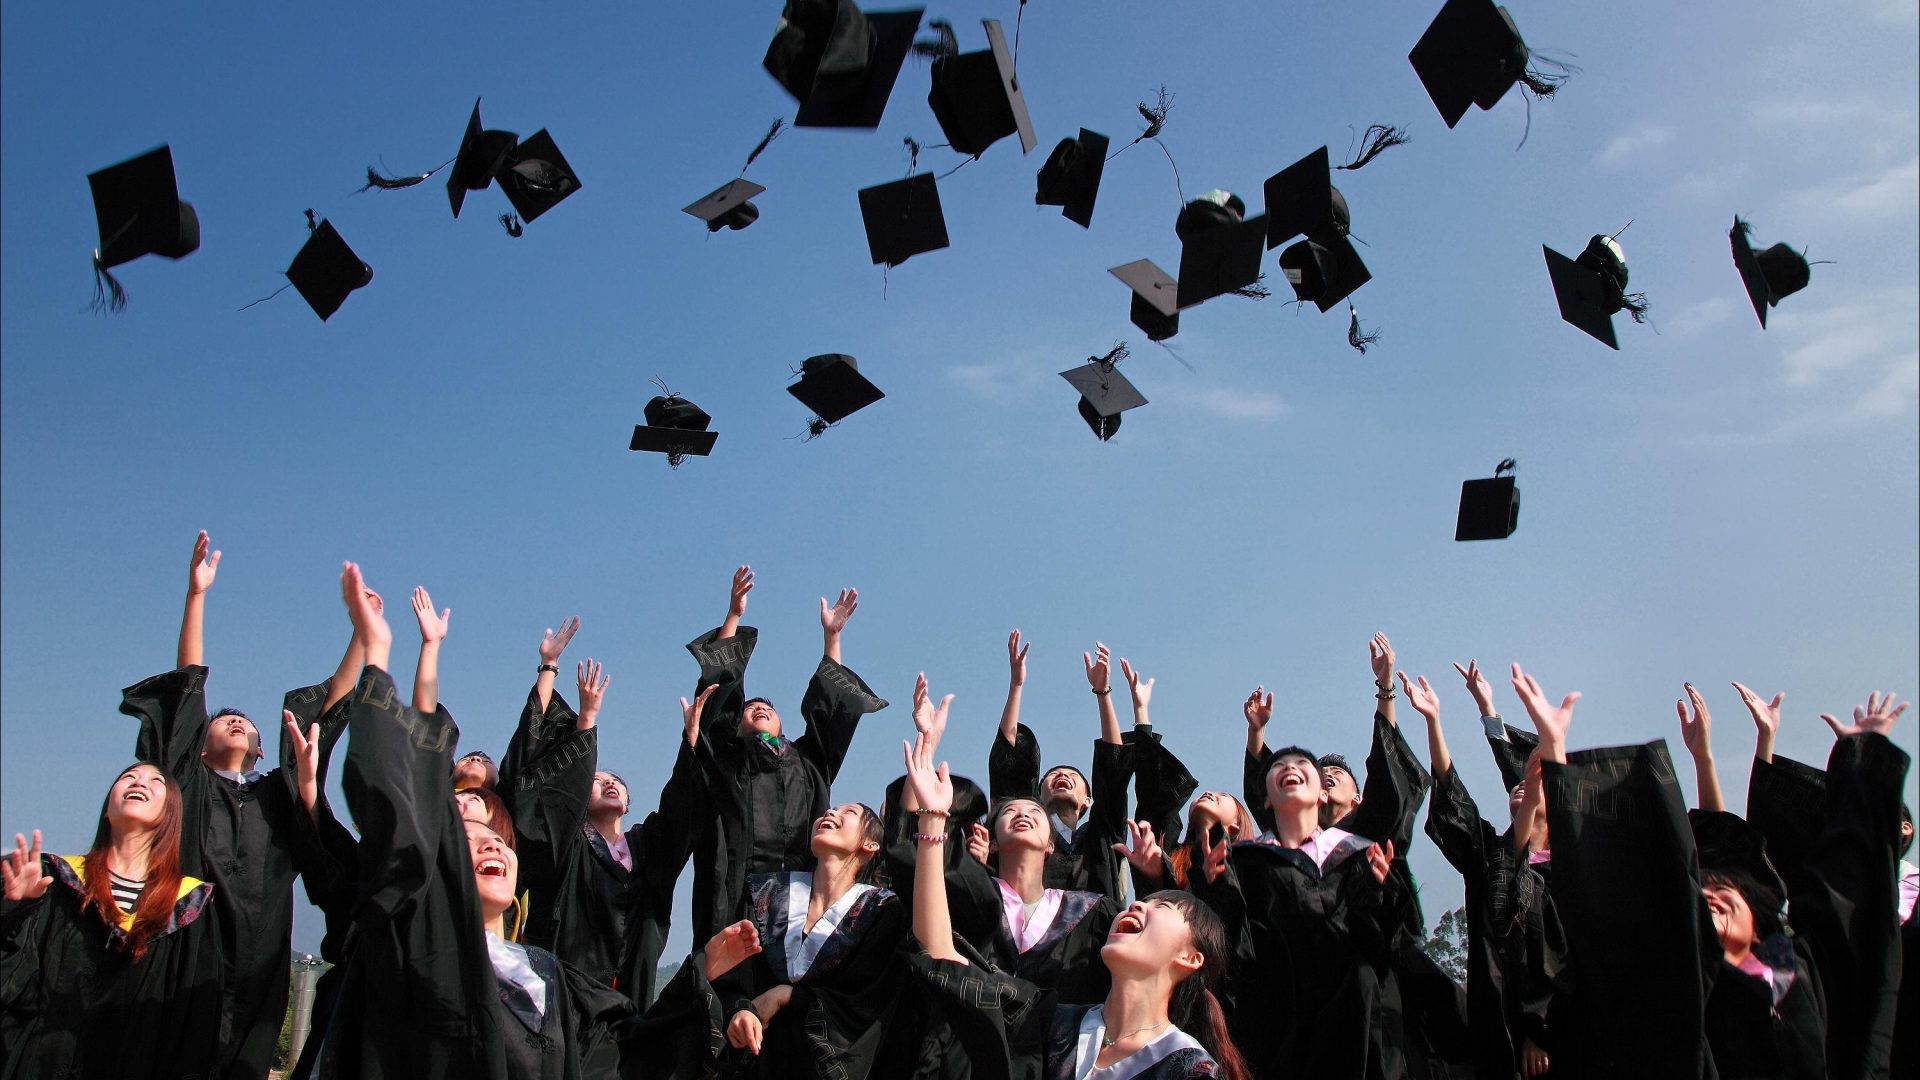 Group of graduates throwing hats into air